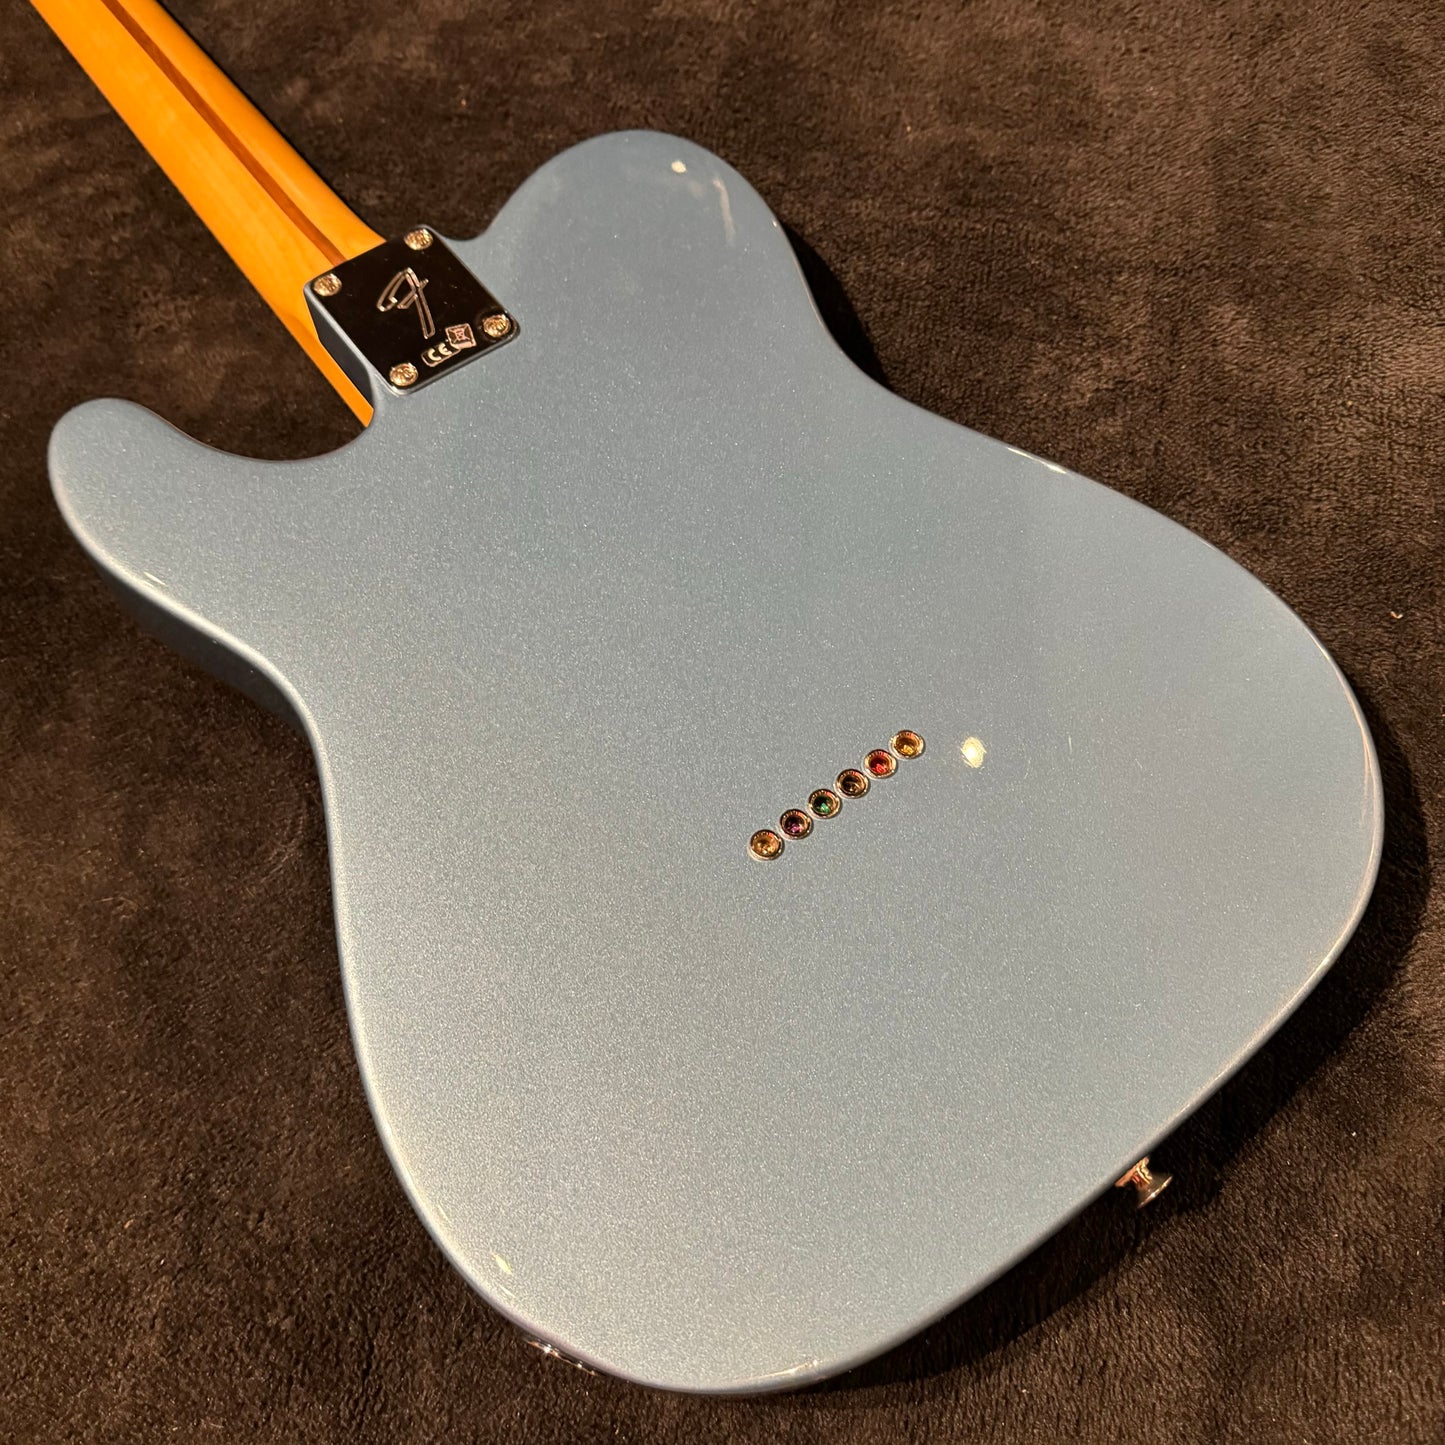 Fender Telecaster Player Series in Tidepool Blue